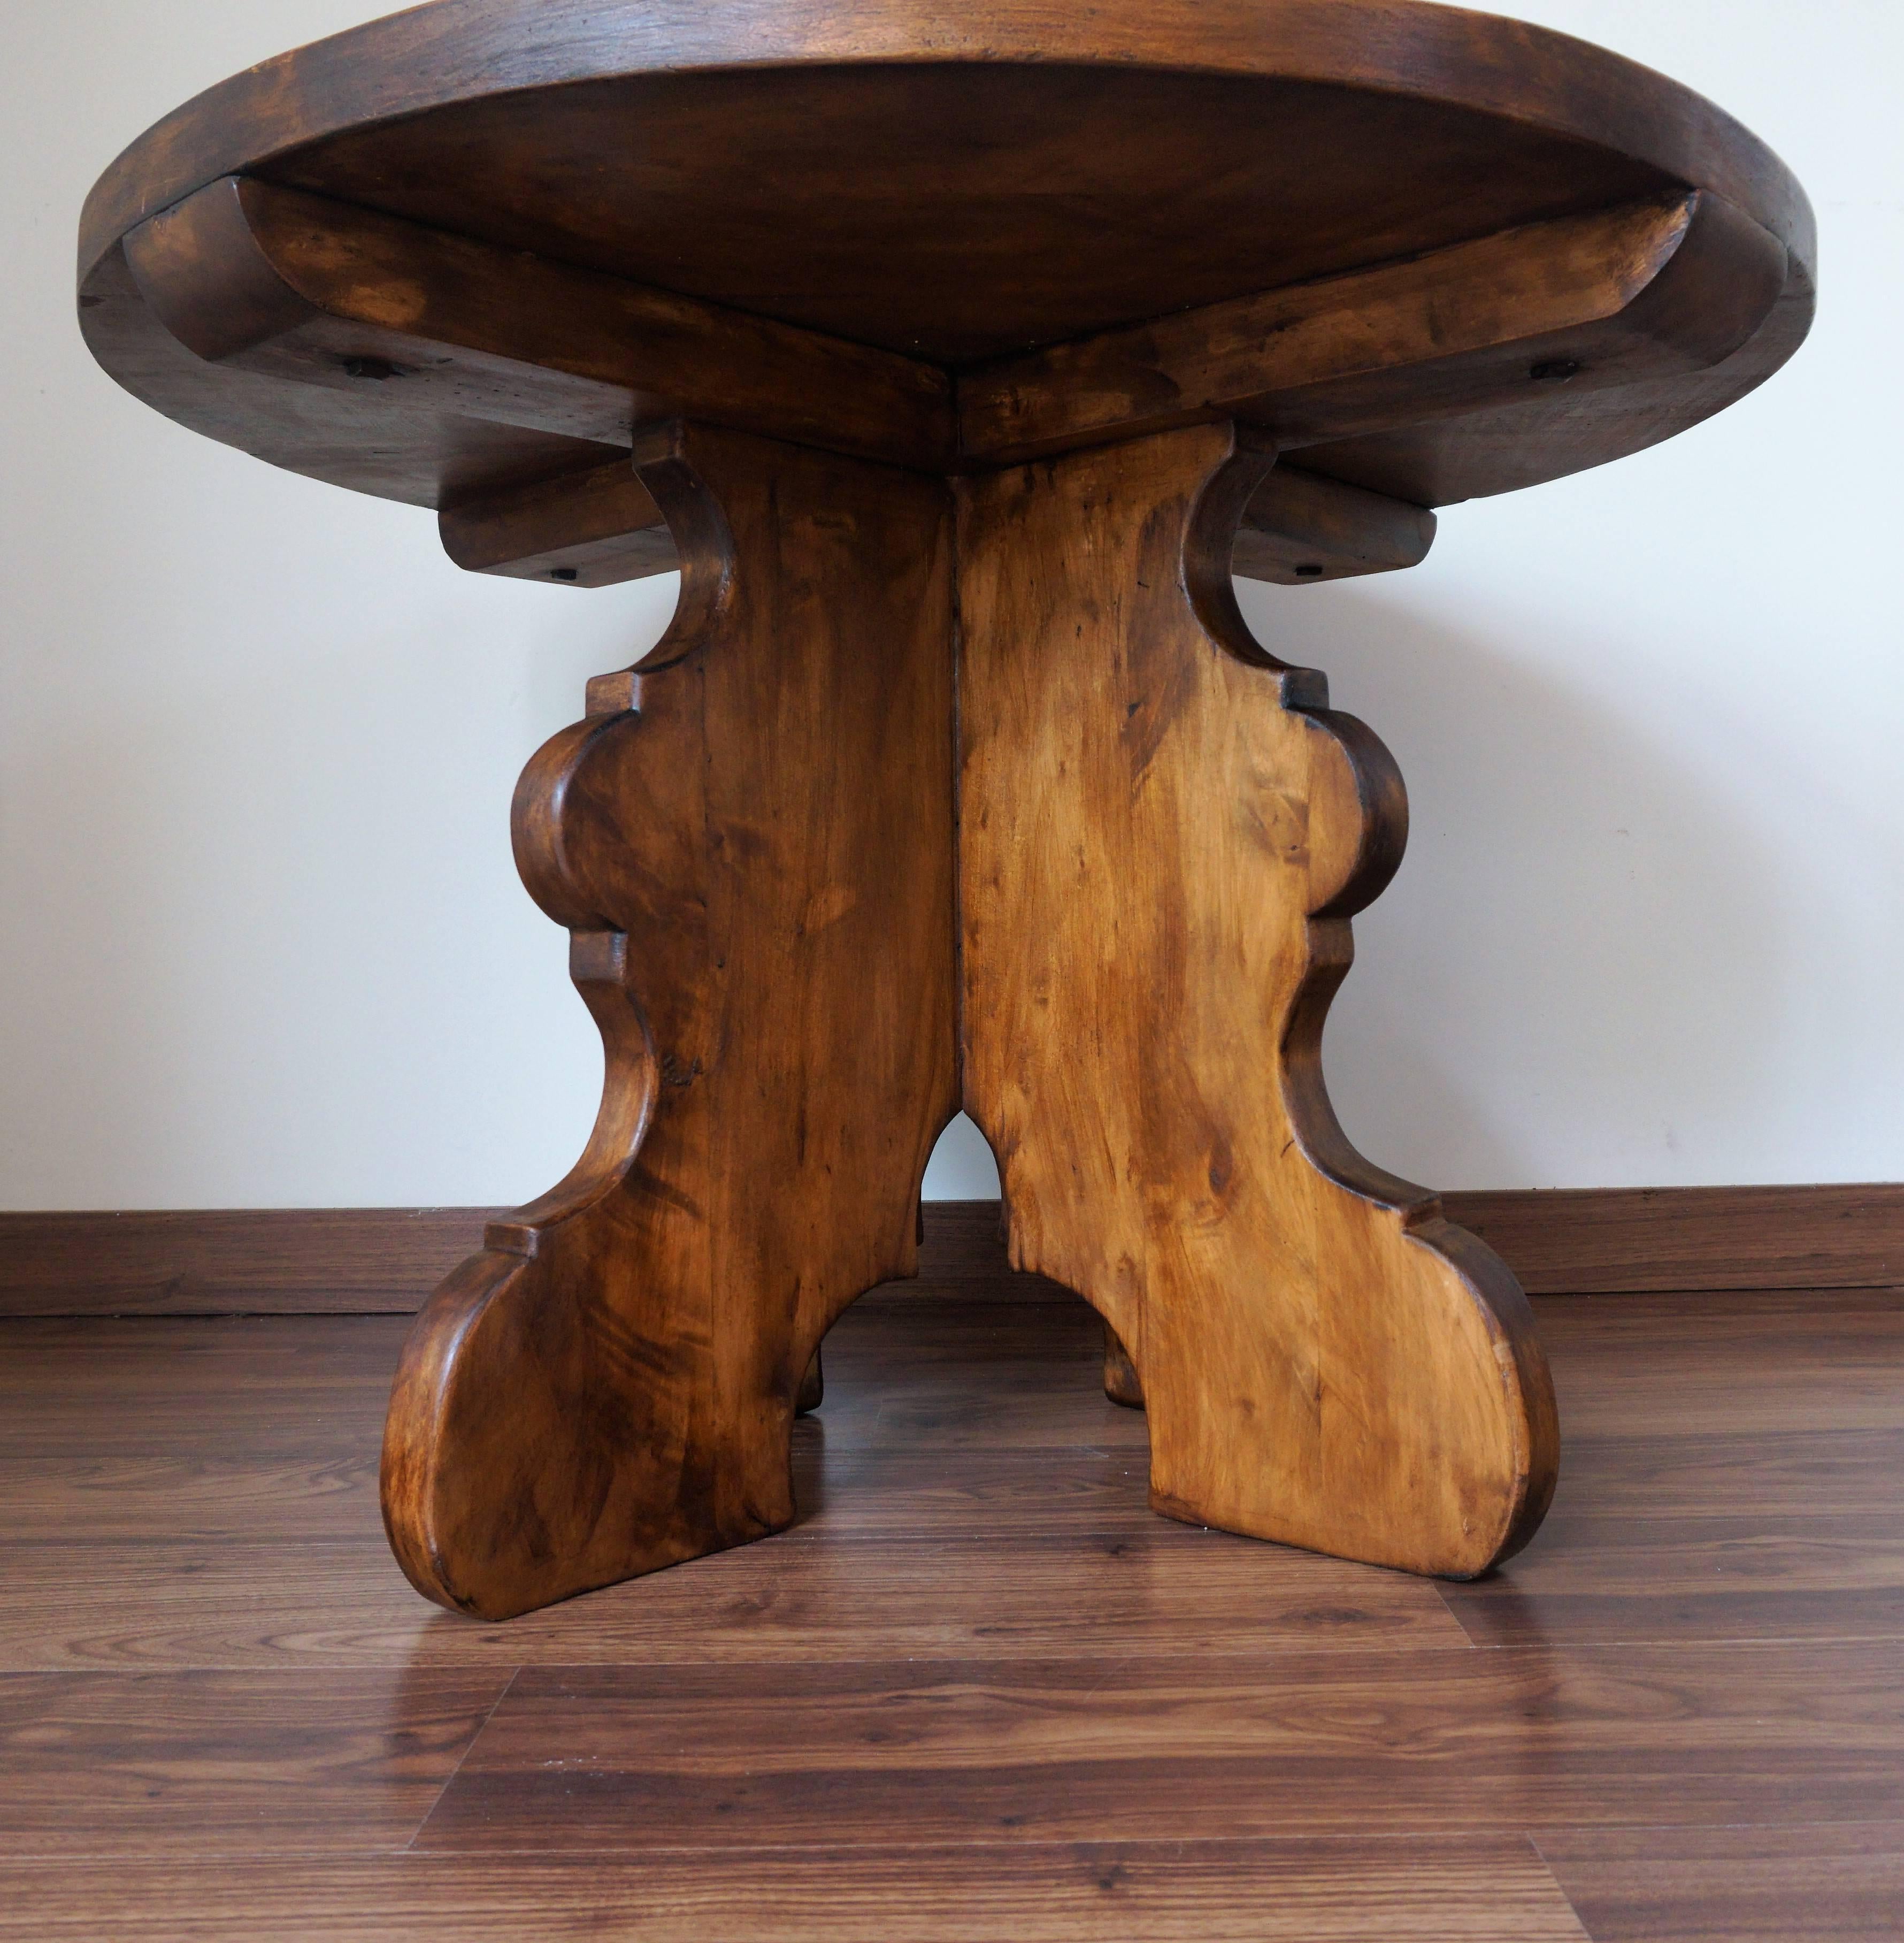 20th century rustic round coffee table or side table 
Thickness of top 1.38in.